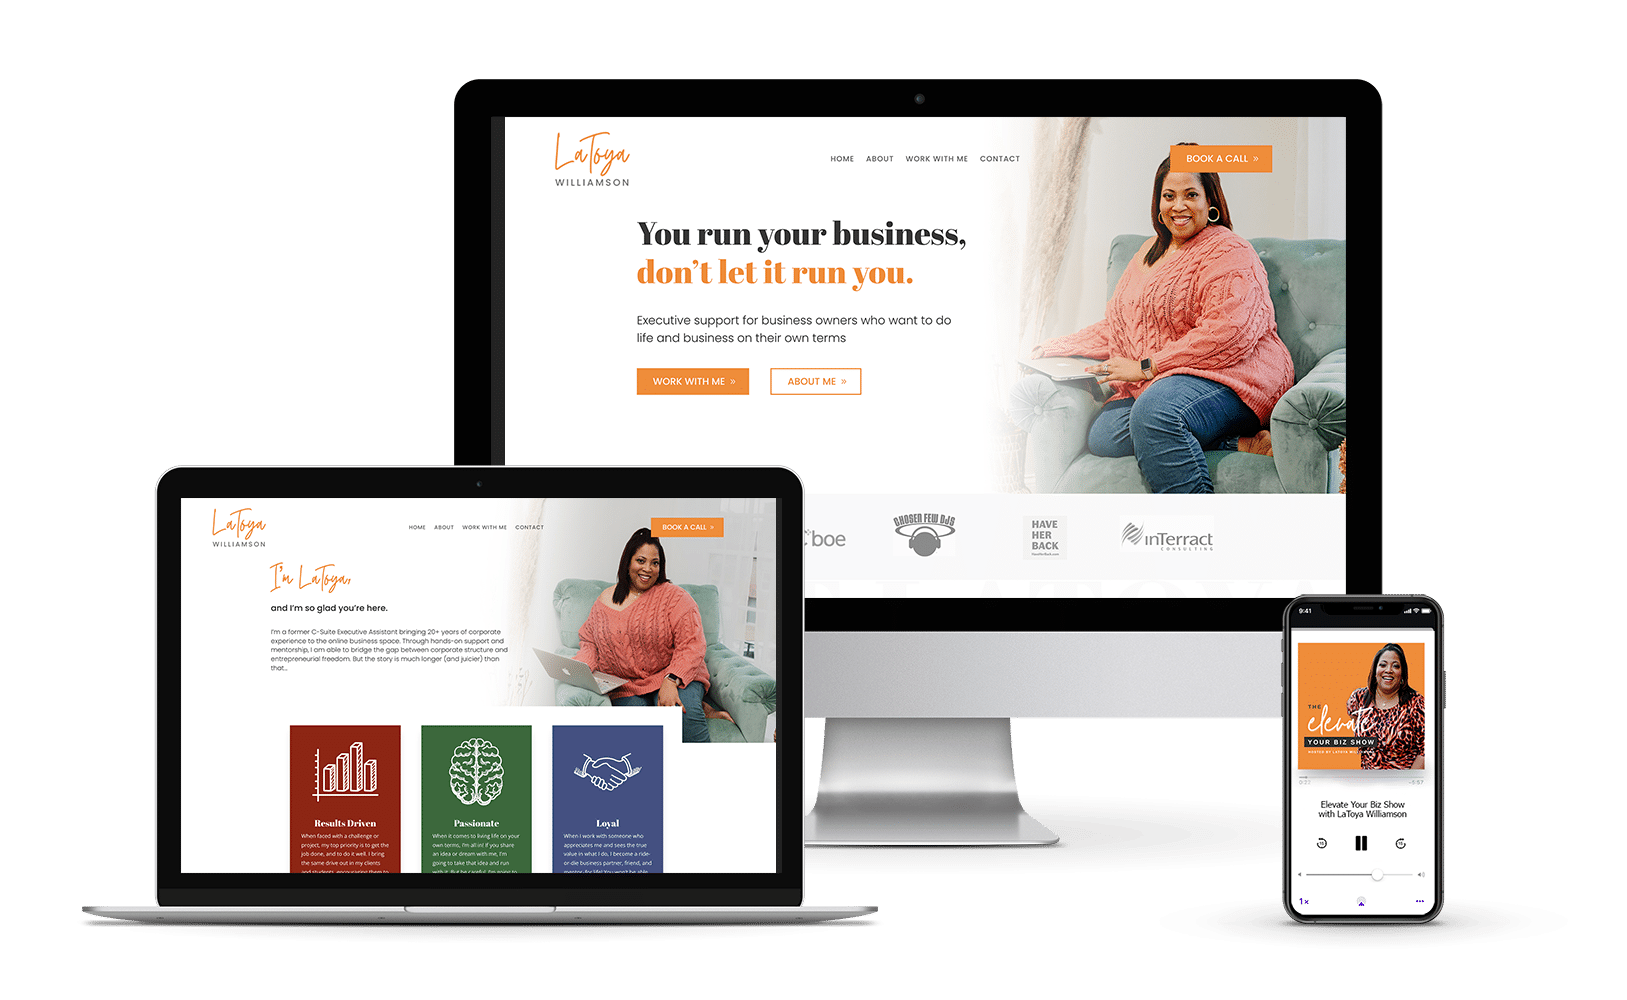 One Day Website Design for Coaches: VIP WordPress website designed for conversions and completed quickly